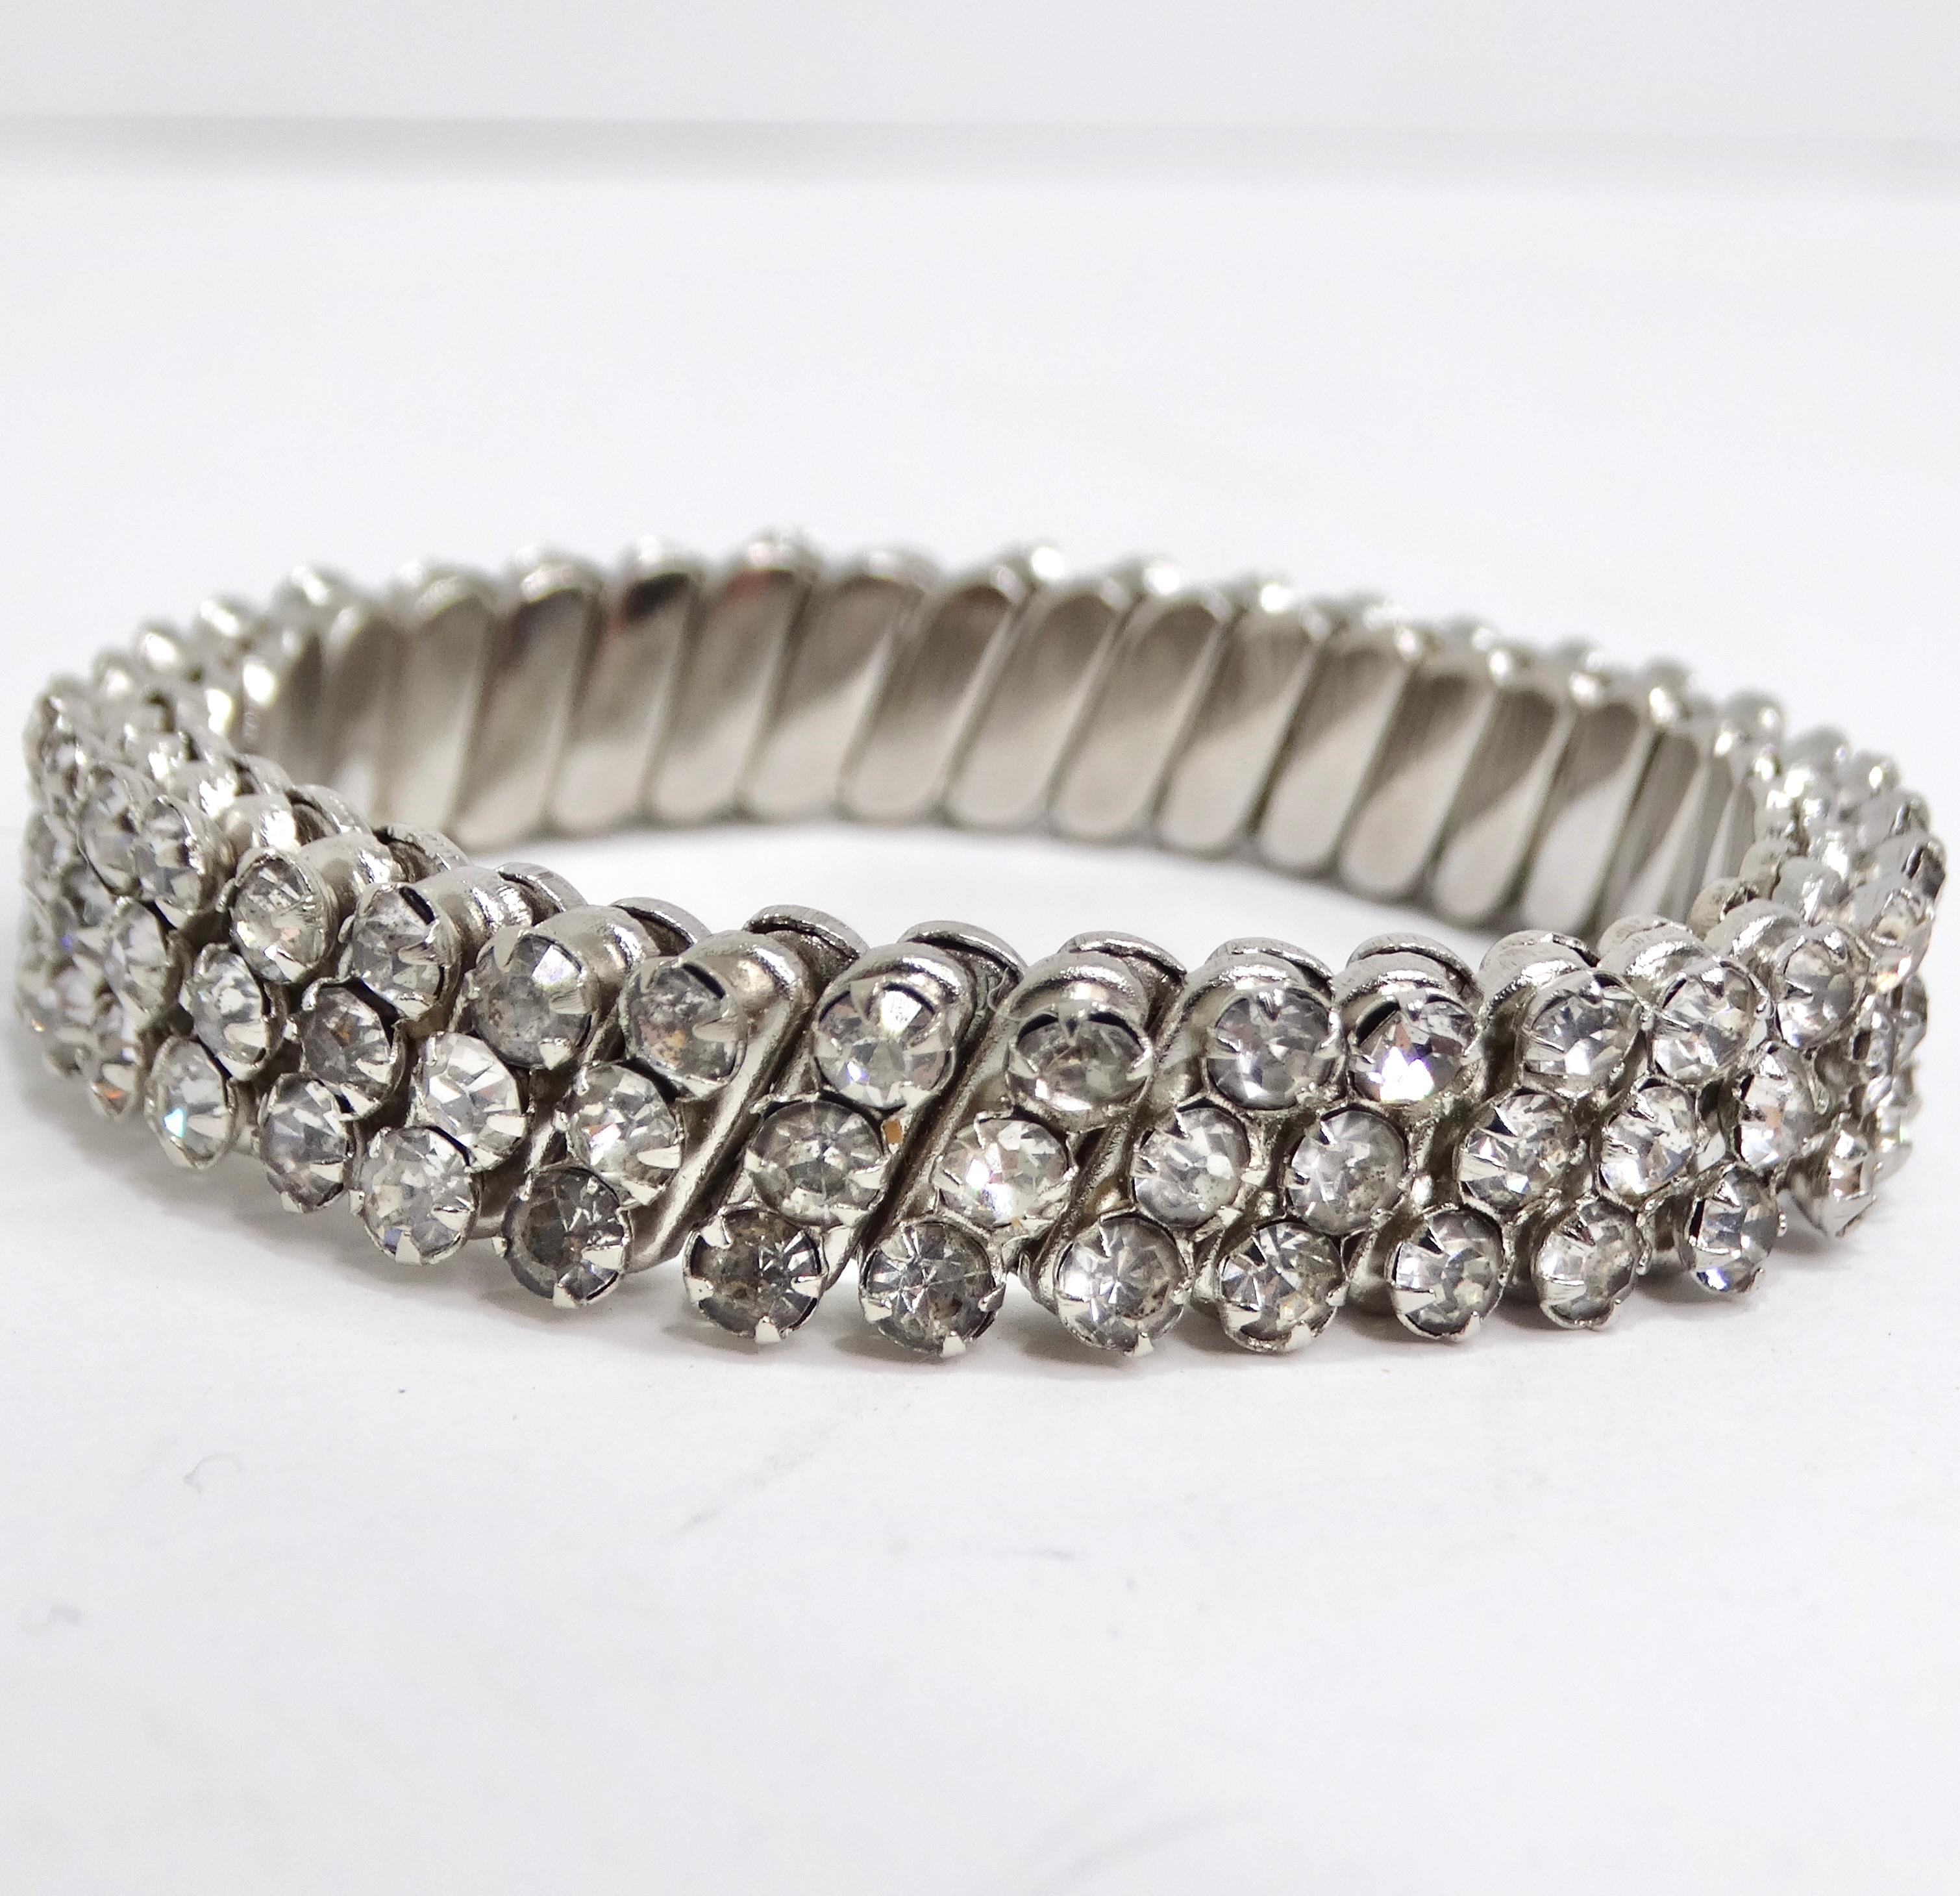 Elevate your style with the 1980s Swarovski Crystal Adjustable Bracelet, a classic piece of jewelry that features three rows of round clear Swarovski crystals encased in silver plating. This bracelet's design is a testament to timeless elegance. The